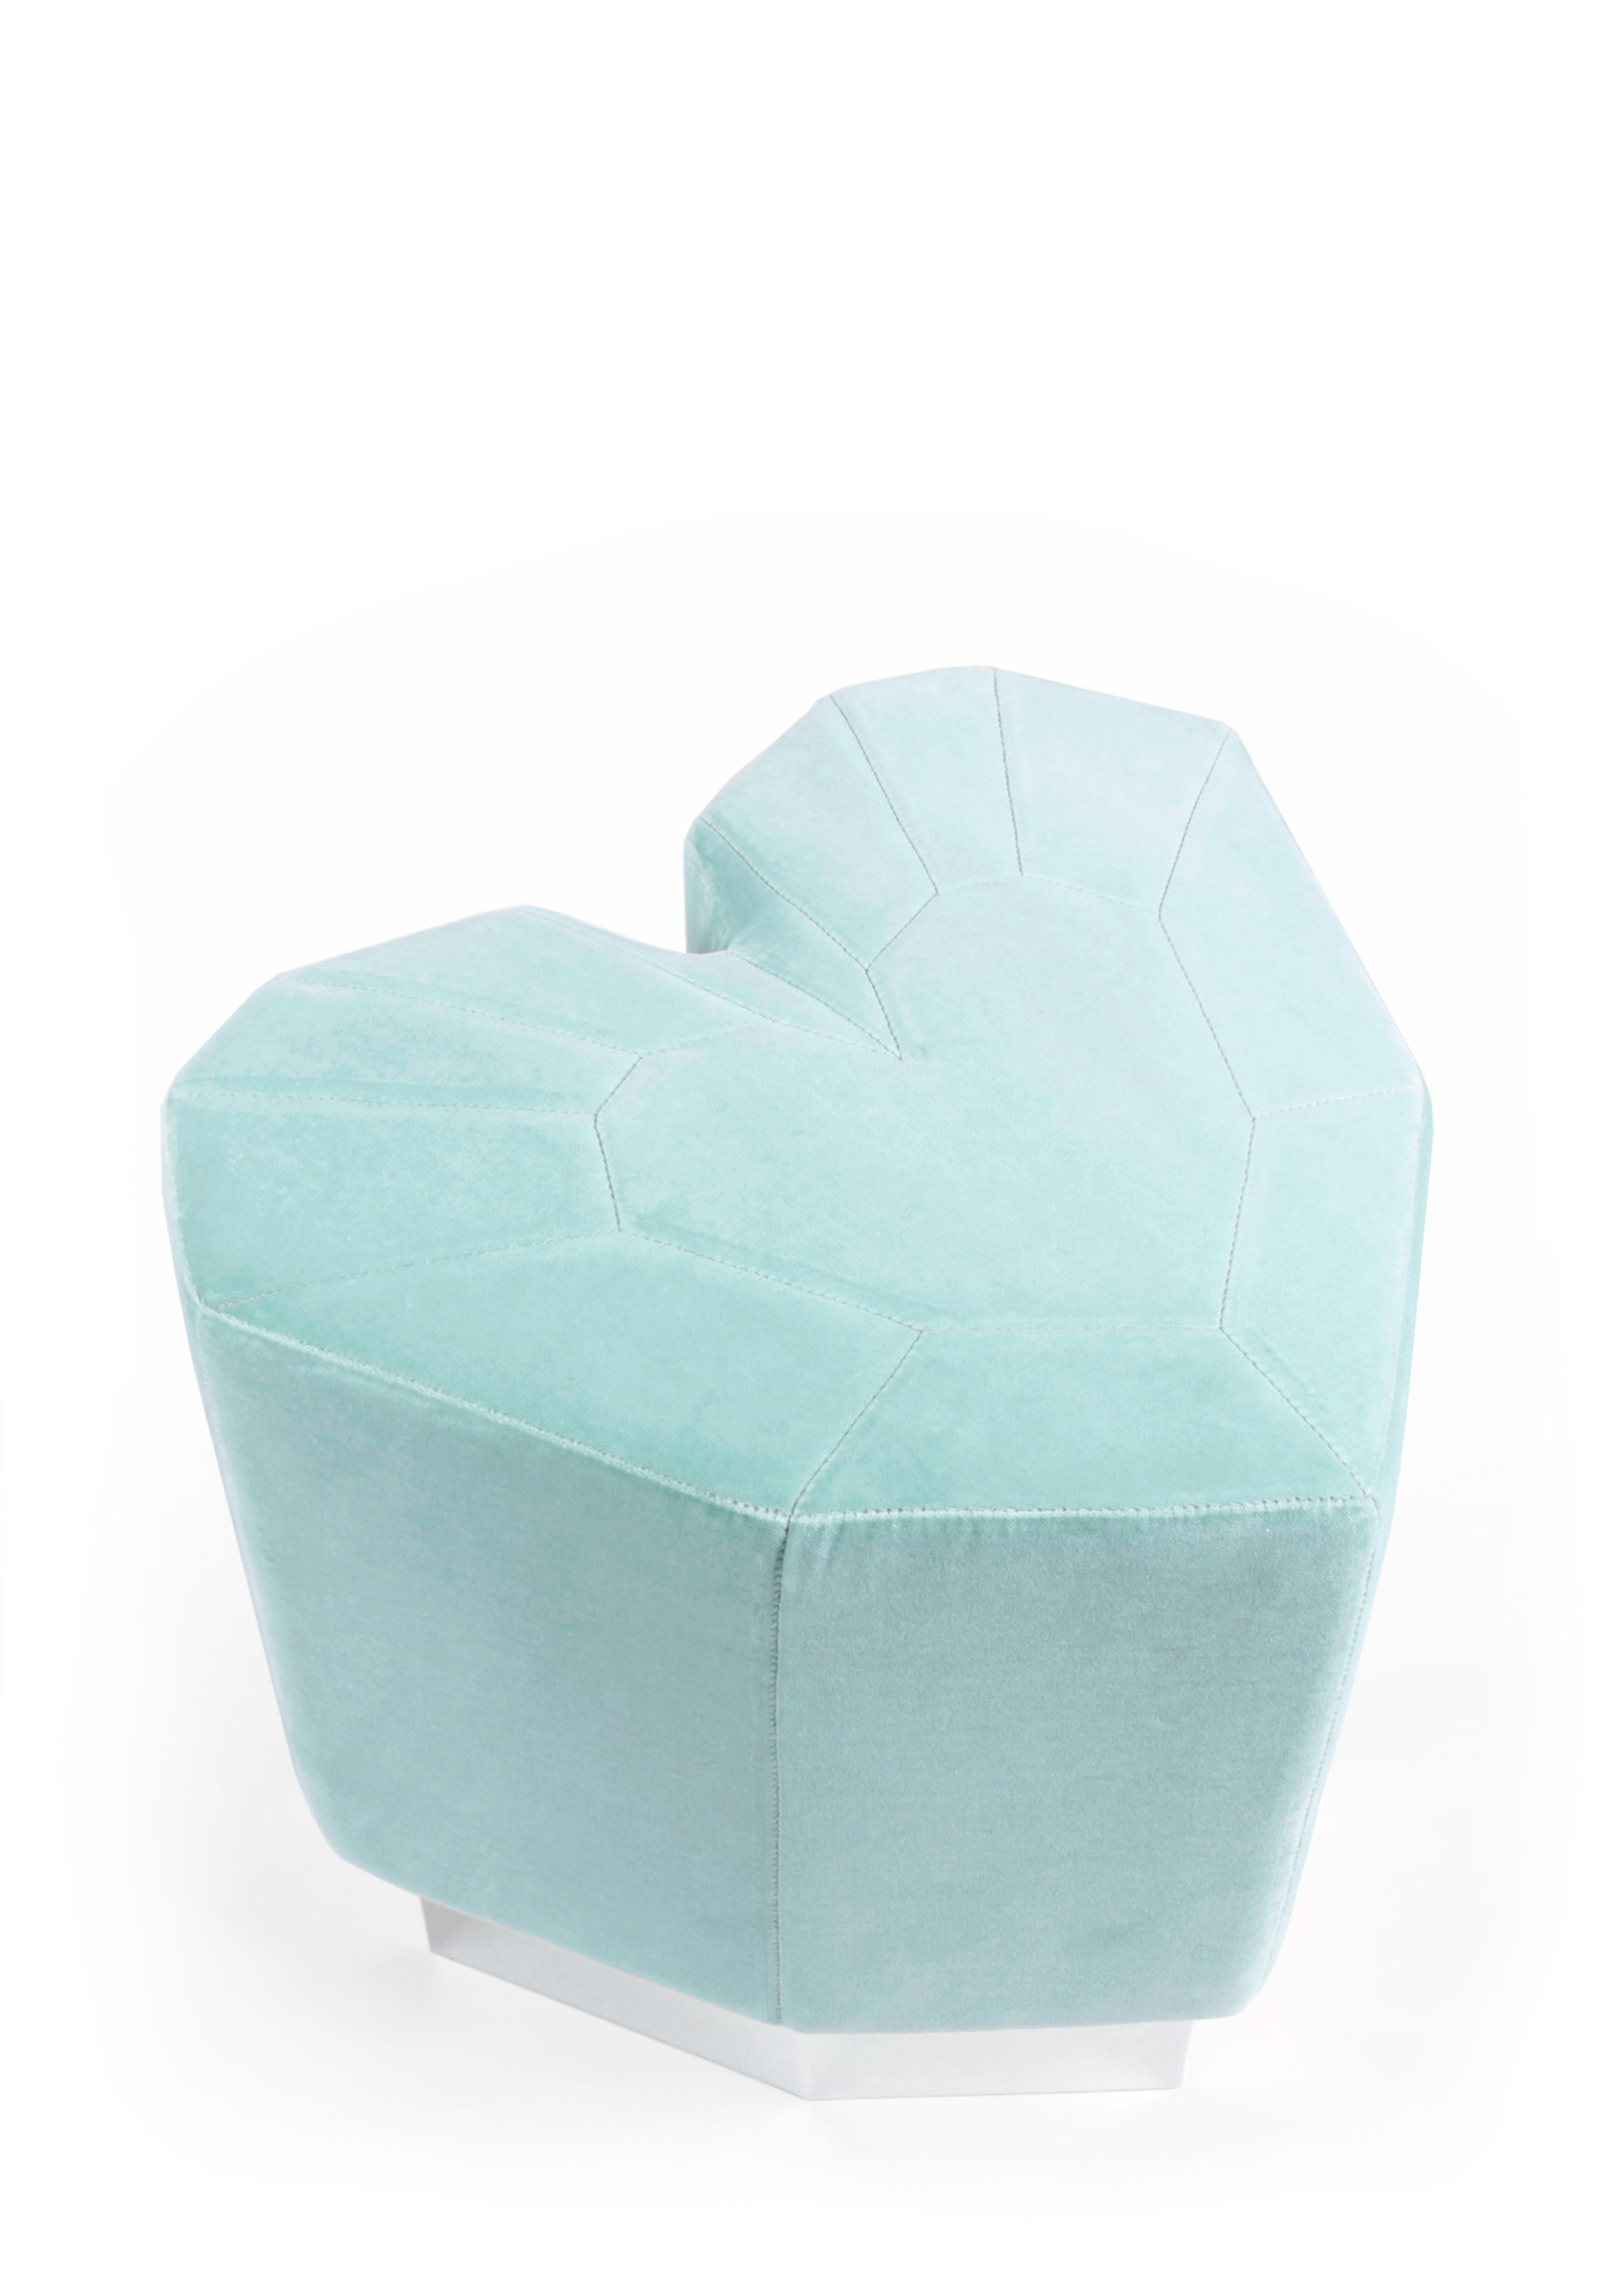 Set of 2 Mint Green Queen Heart Stools by Royal Stranger For Sale 7